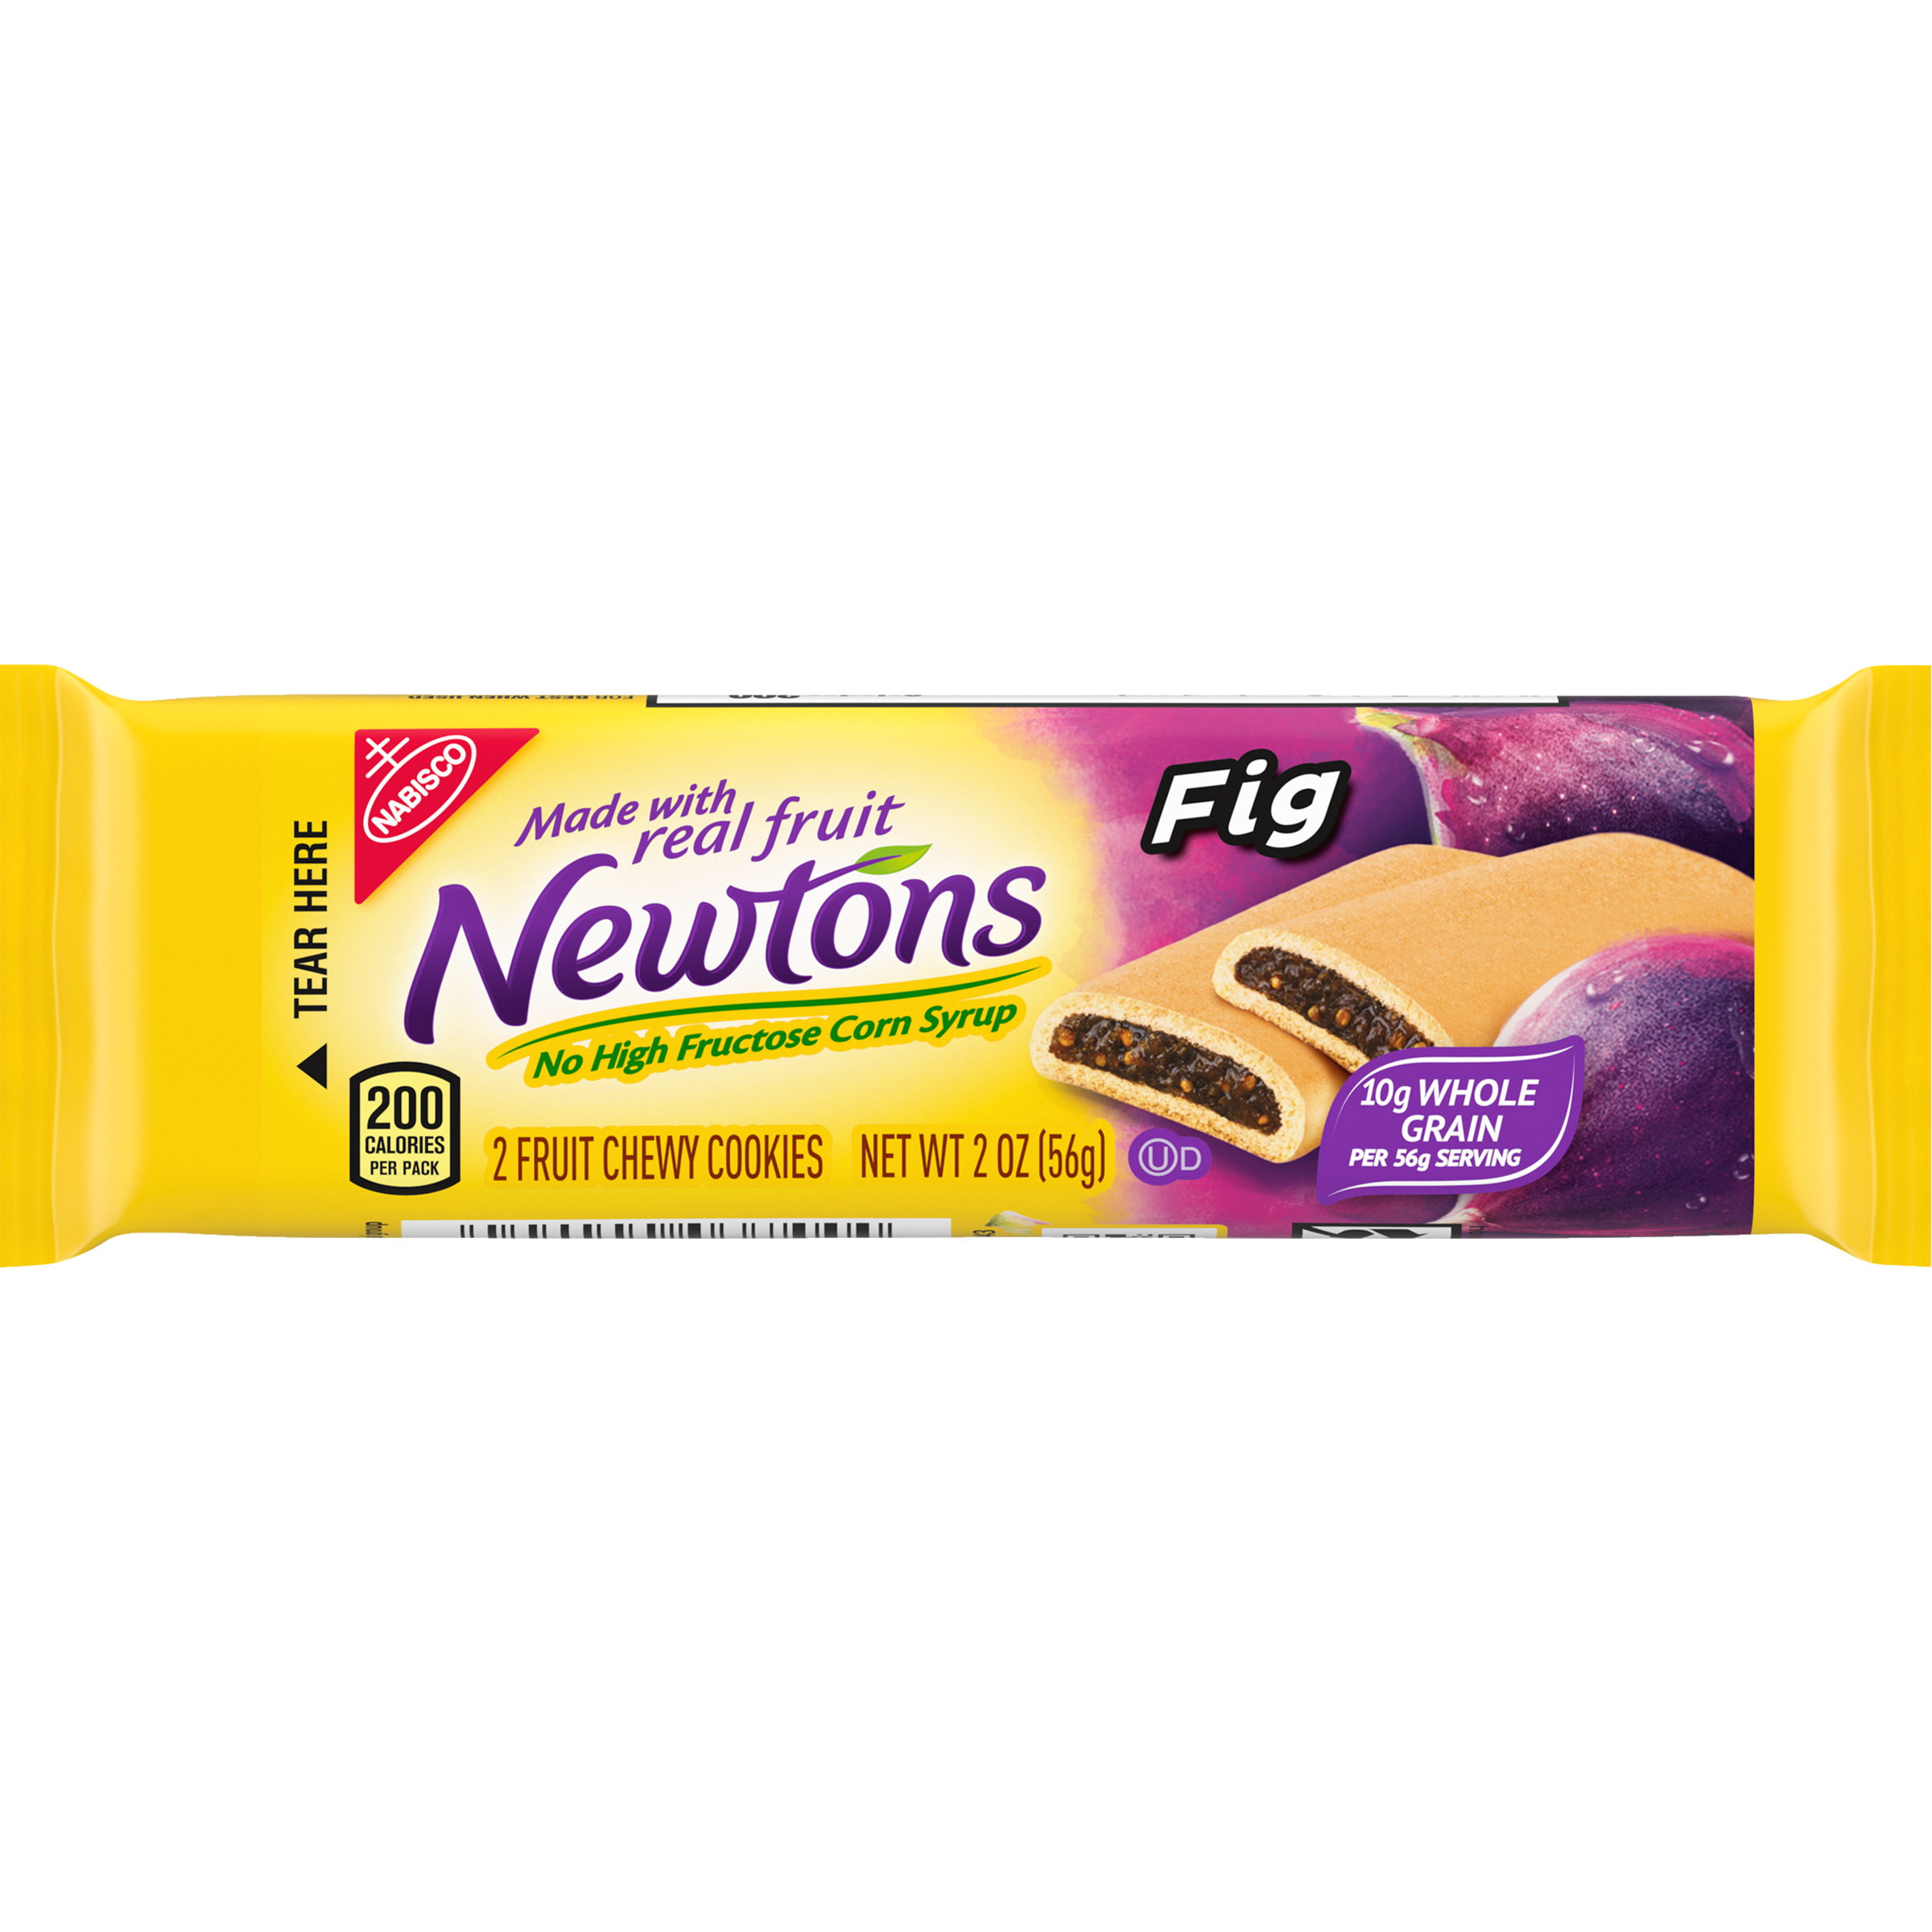 Newtons Soft & Fruit Chewy Fig Cookies, 2 oz Snack Pack (2 Cookies Per Pack)-thumbnail-1